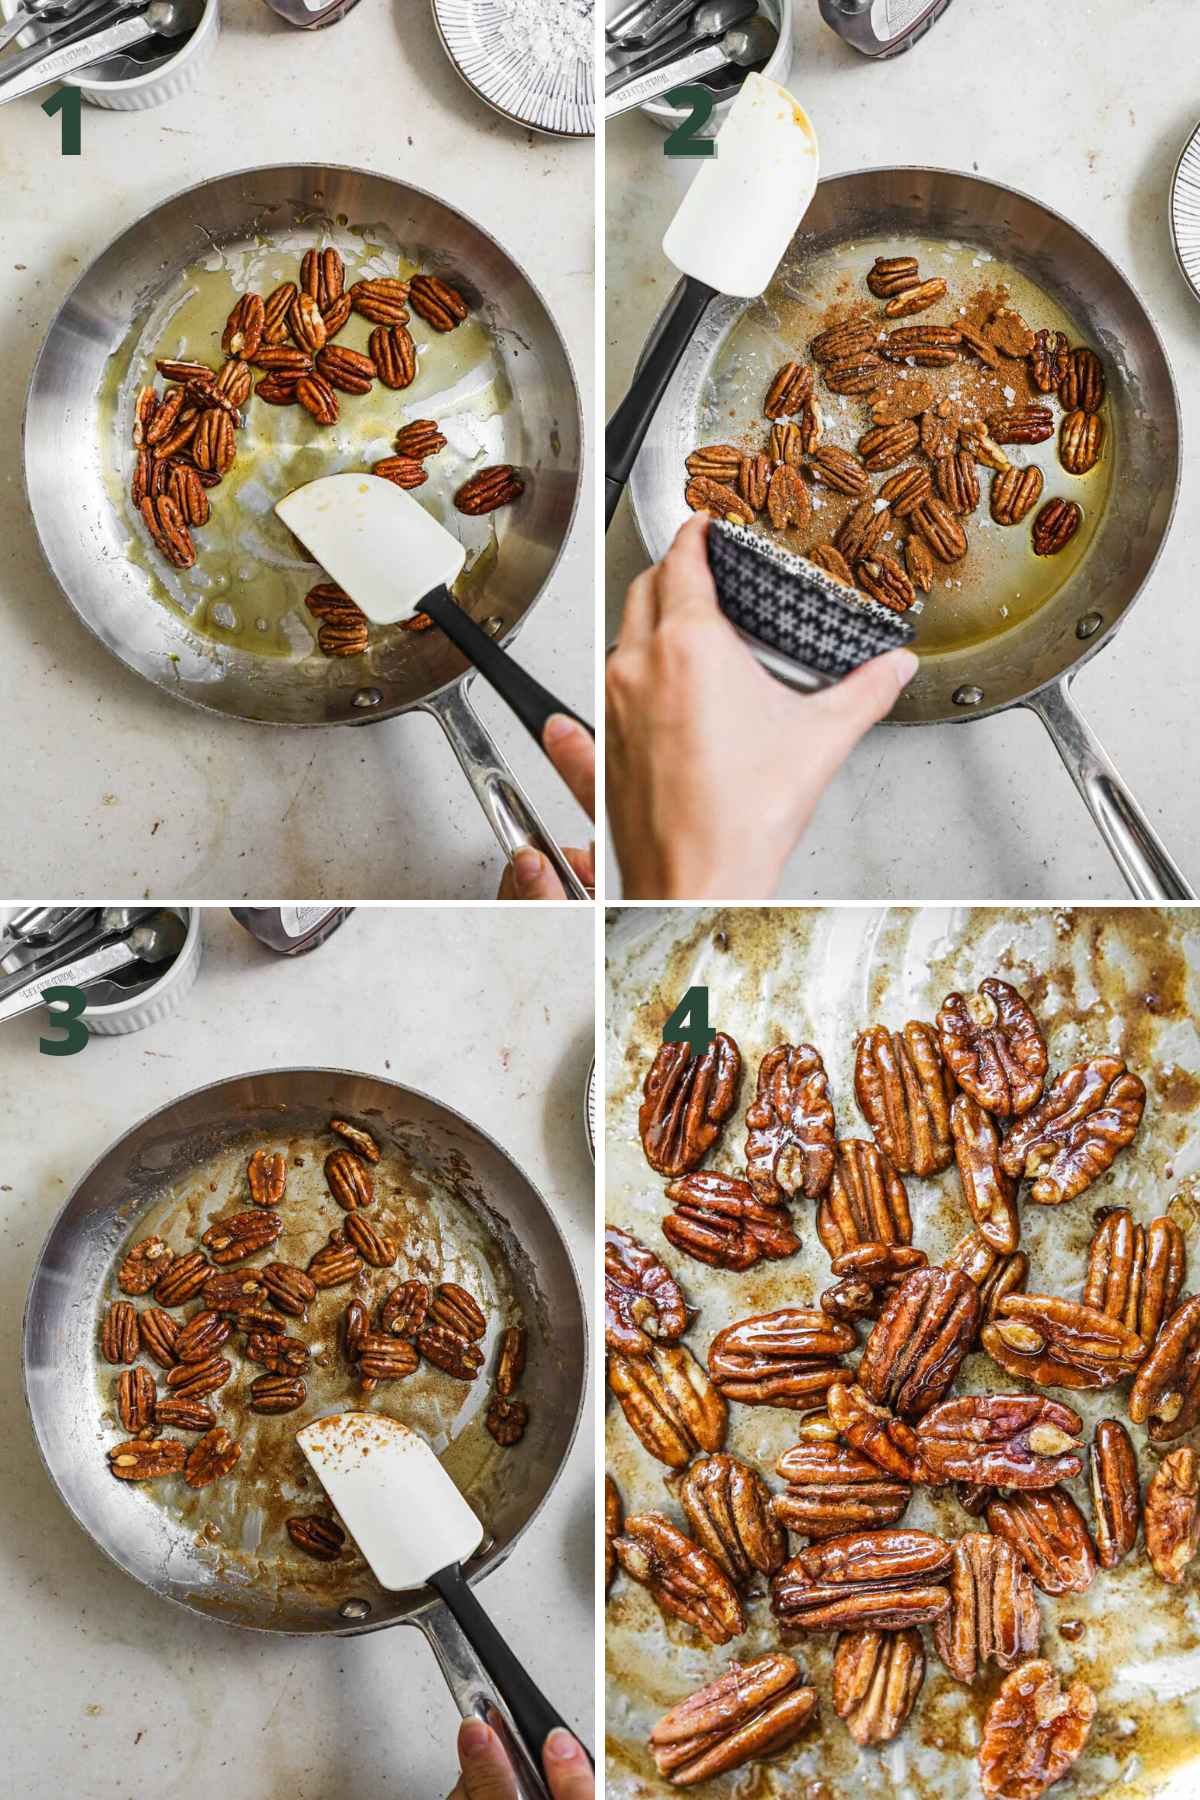 Steps to make candied pecans, toast pecans with maple syrup in a pan, add cinnamon and salt, stir, and allow to cool.